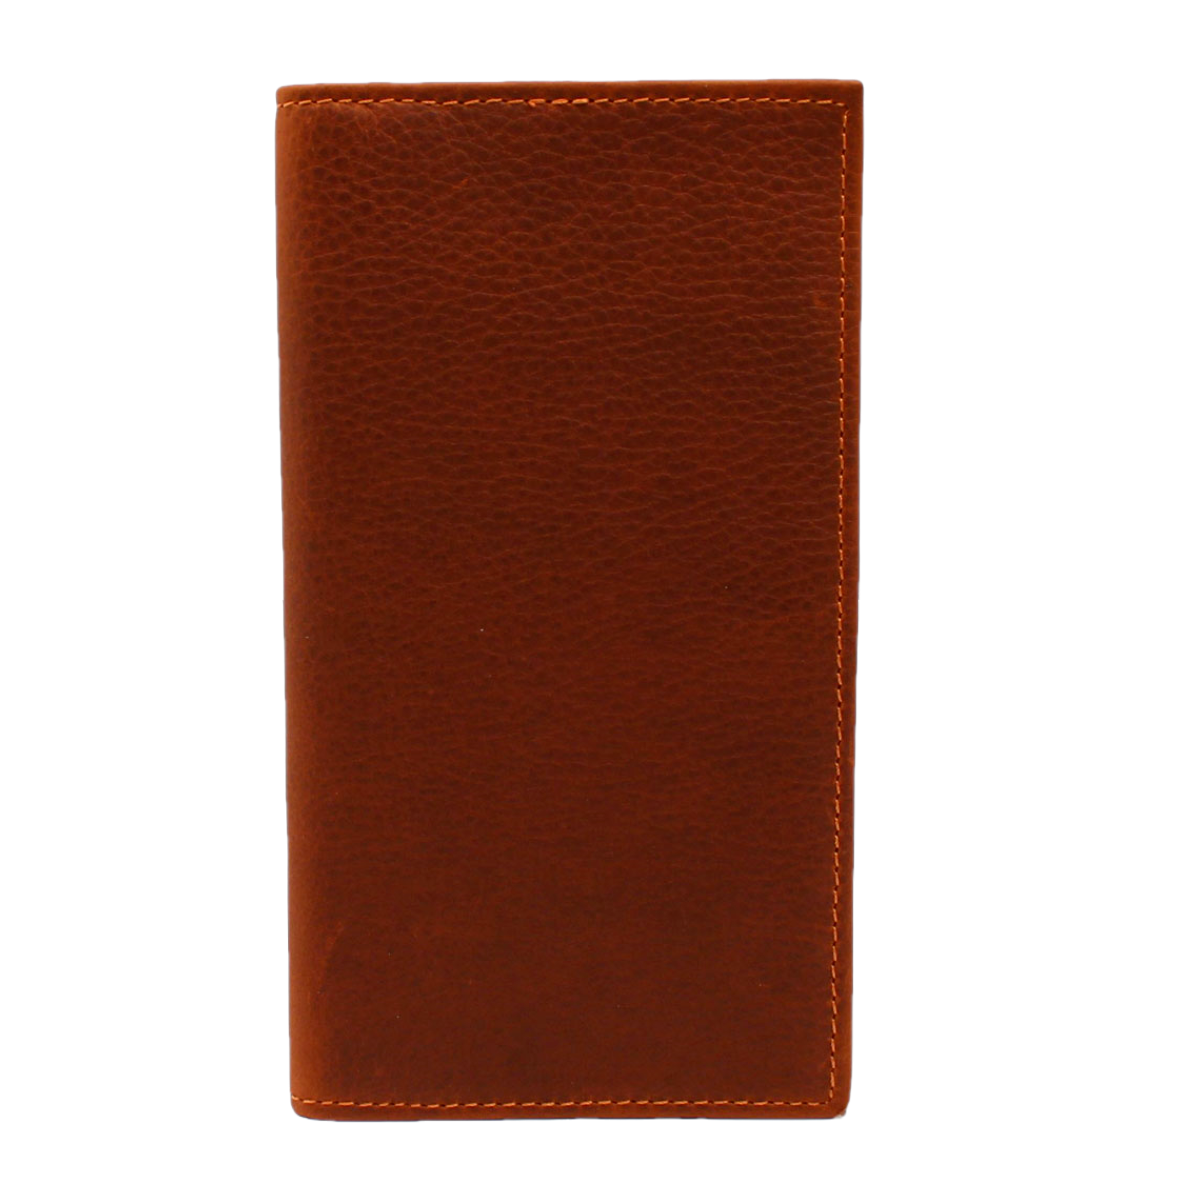 3D Men's Pebbled Brown Leather Rodeo Wallet DWCW142